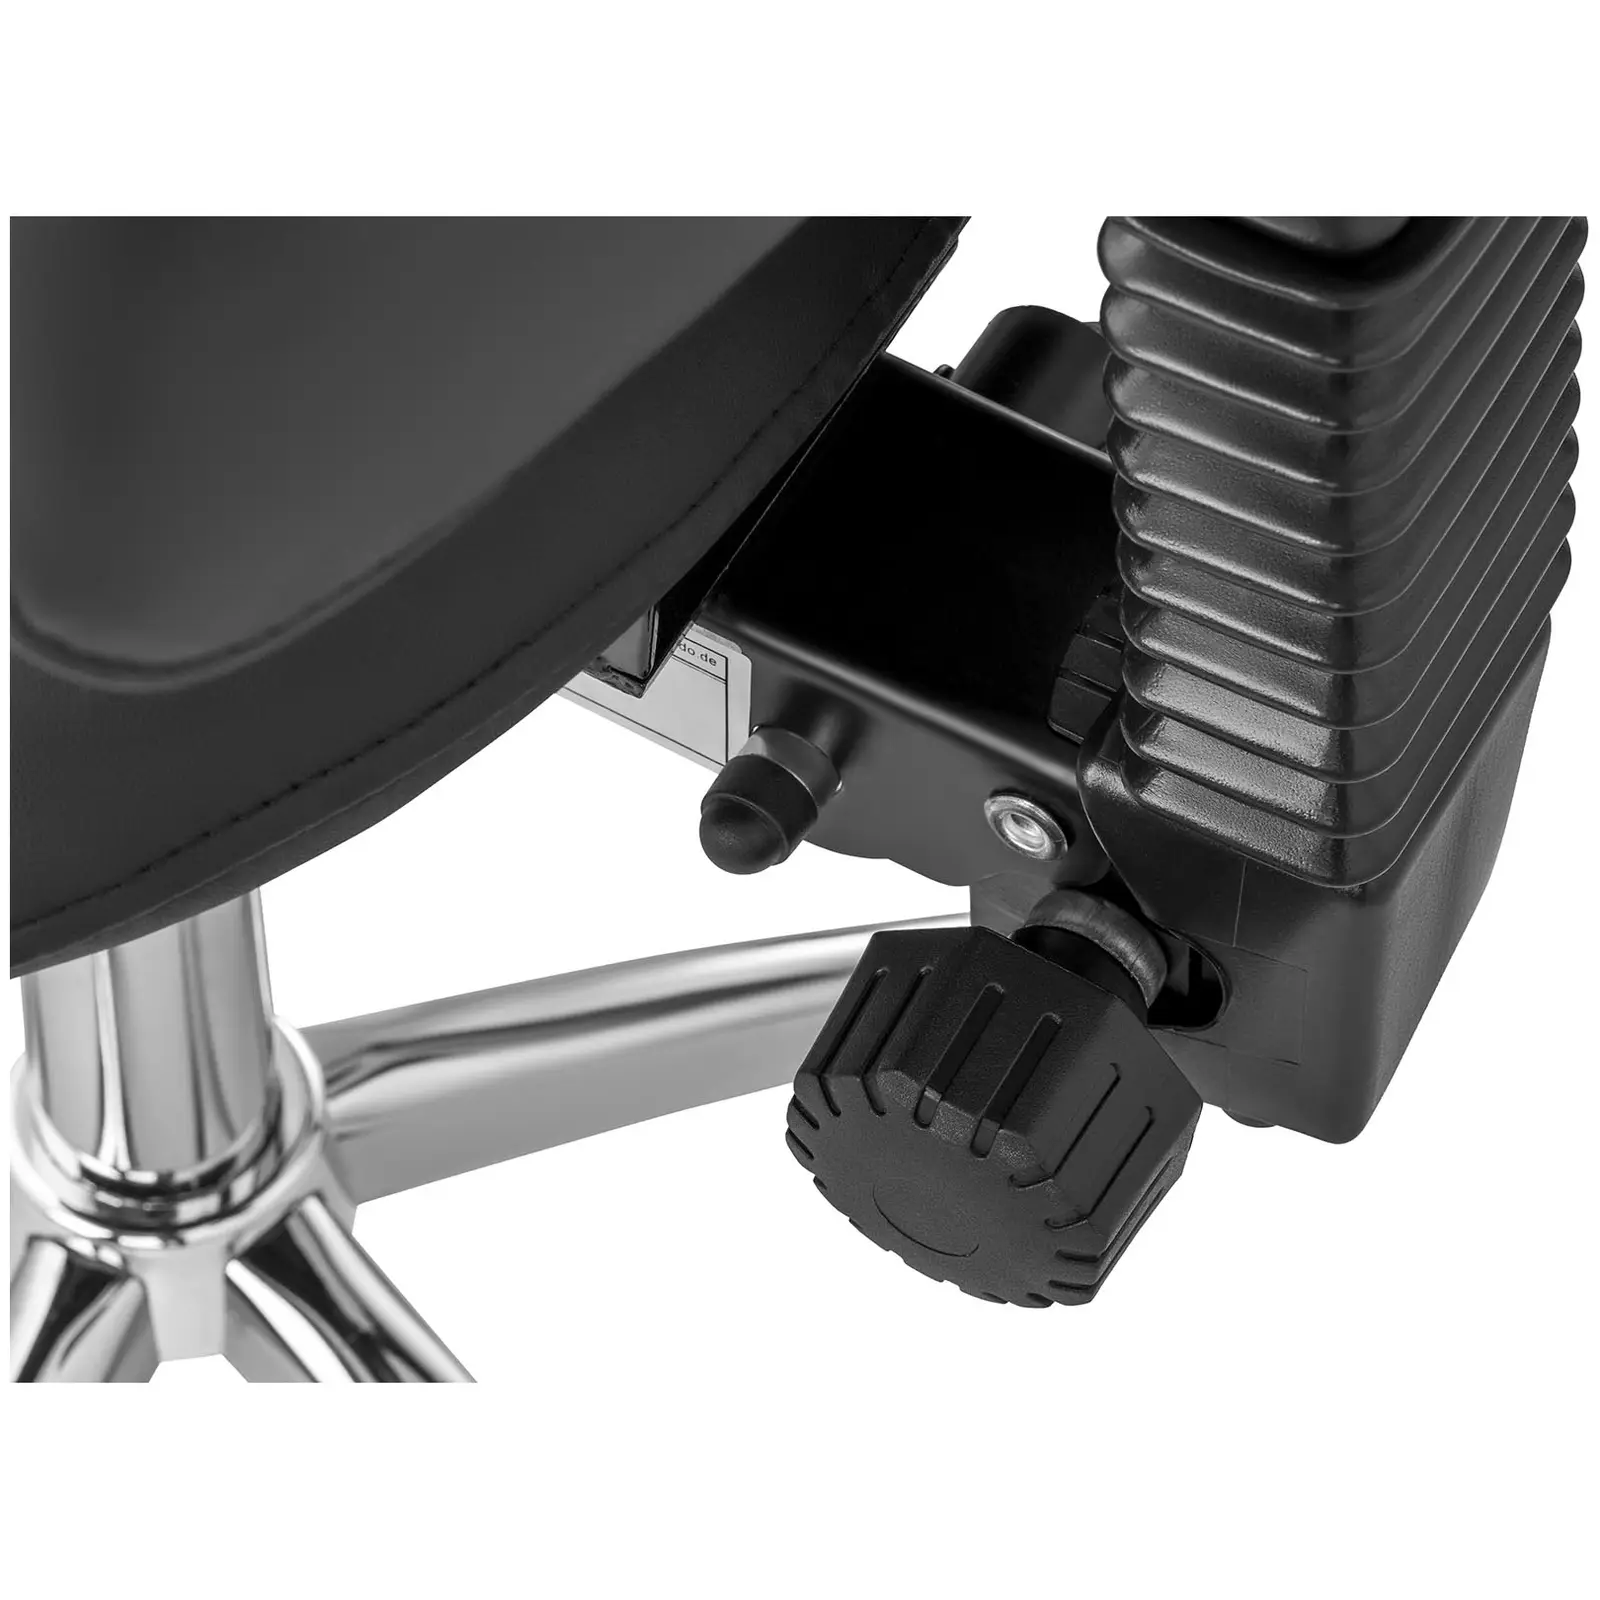 Saddle Chair with Back Support - 550-690 mm - 150 kg - Black